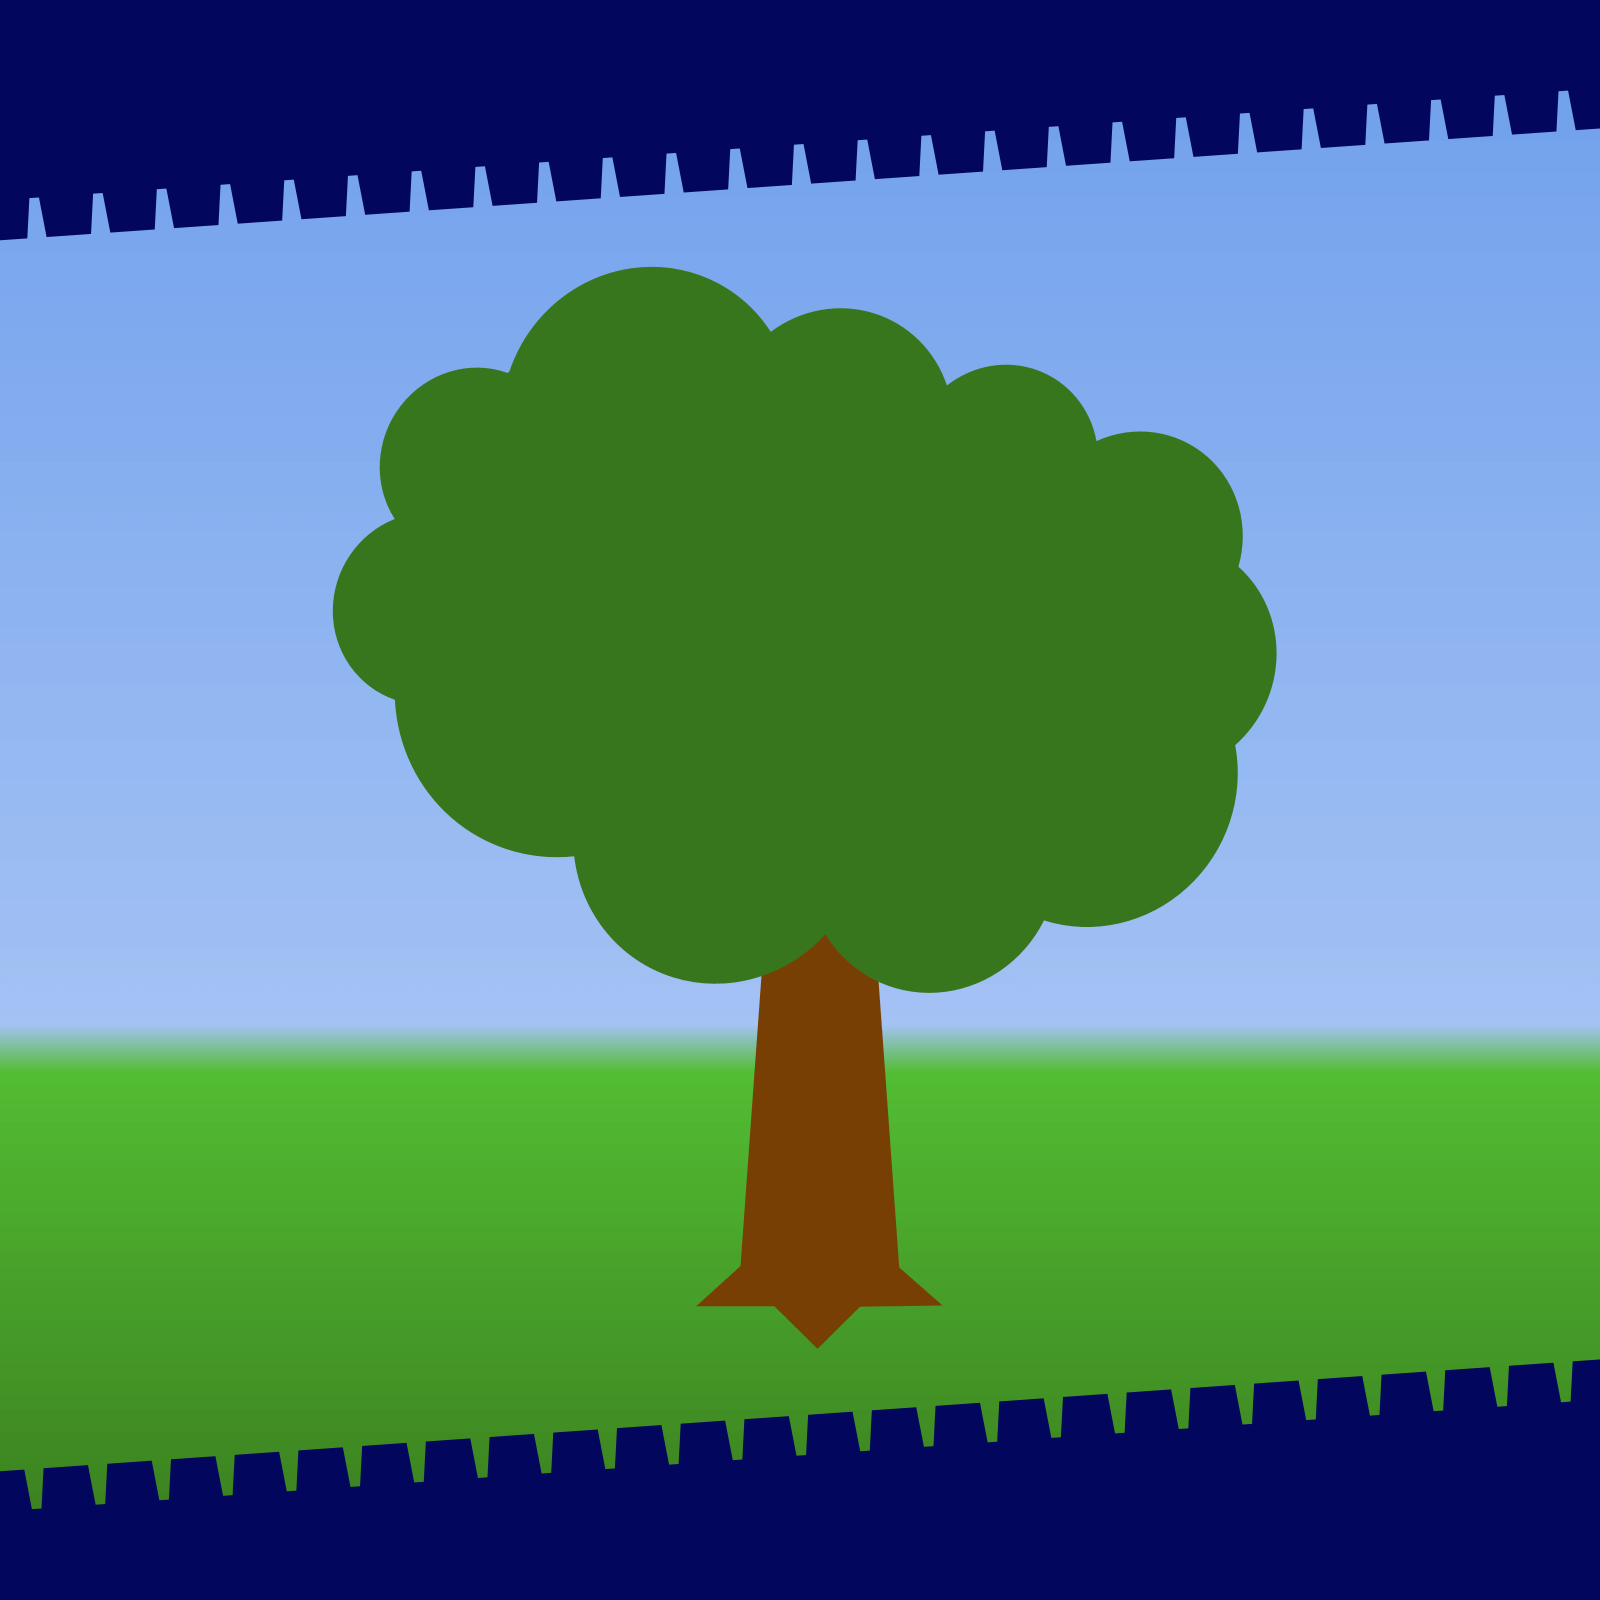 Drawing of a tree with green leaves and a brown trunk